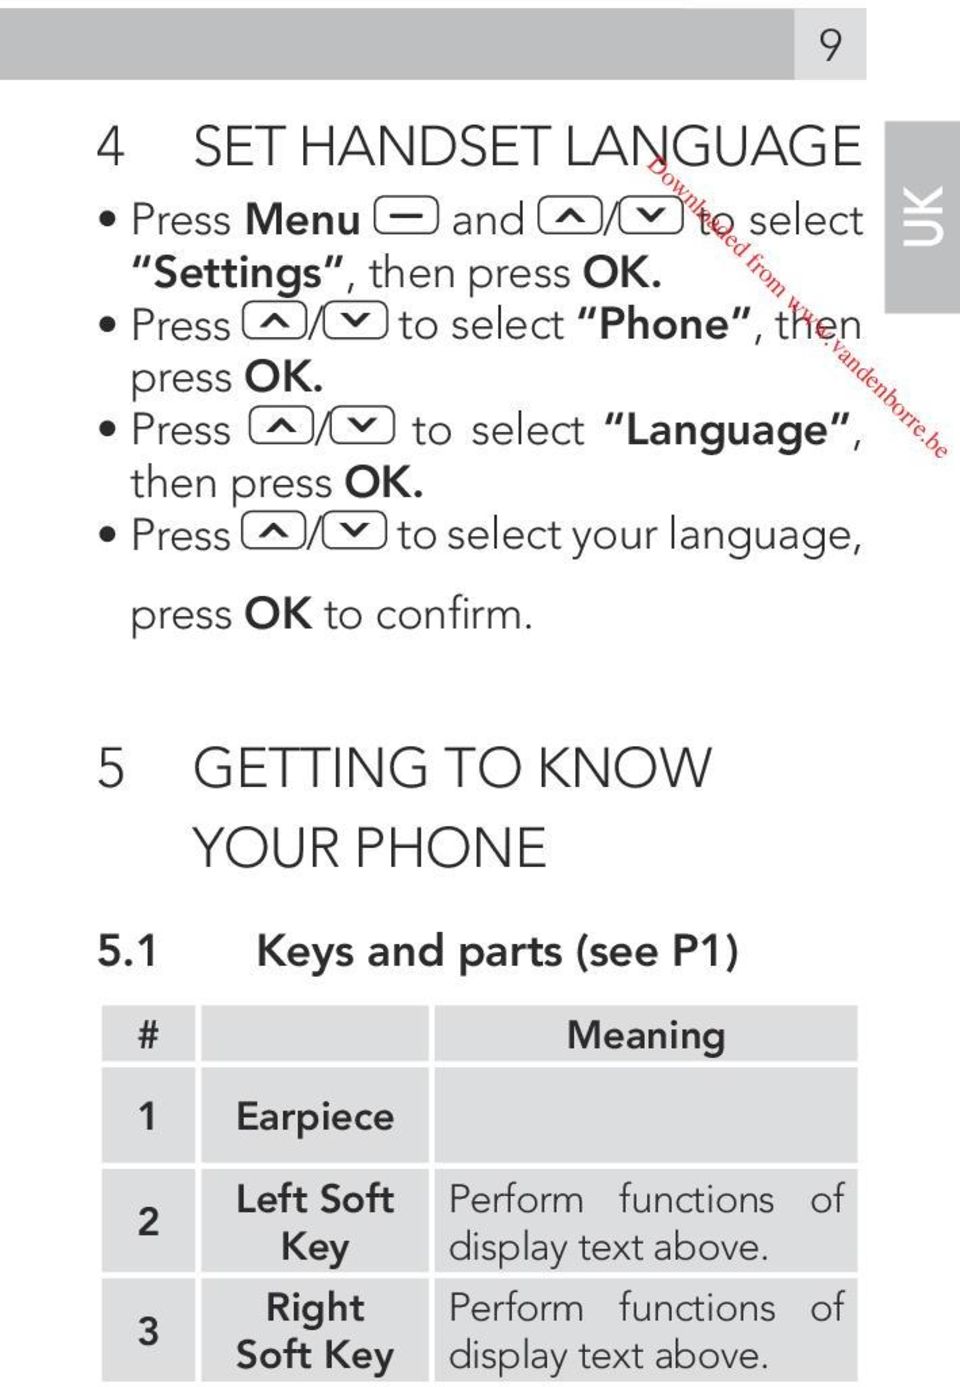 Press / to select your language, press OK to confirm. UK 5 GETTING TO KNOW YOUR PHONE 5.